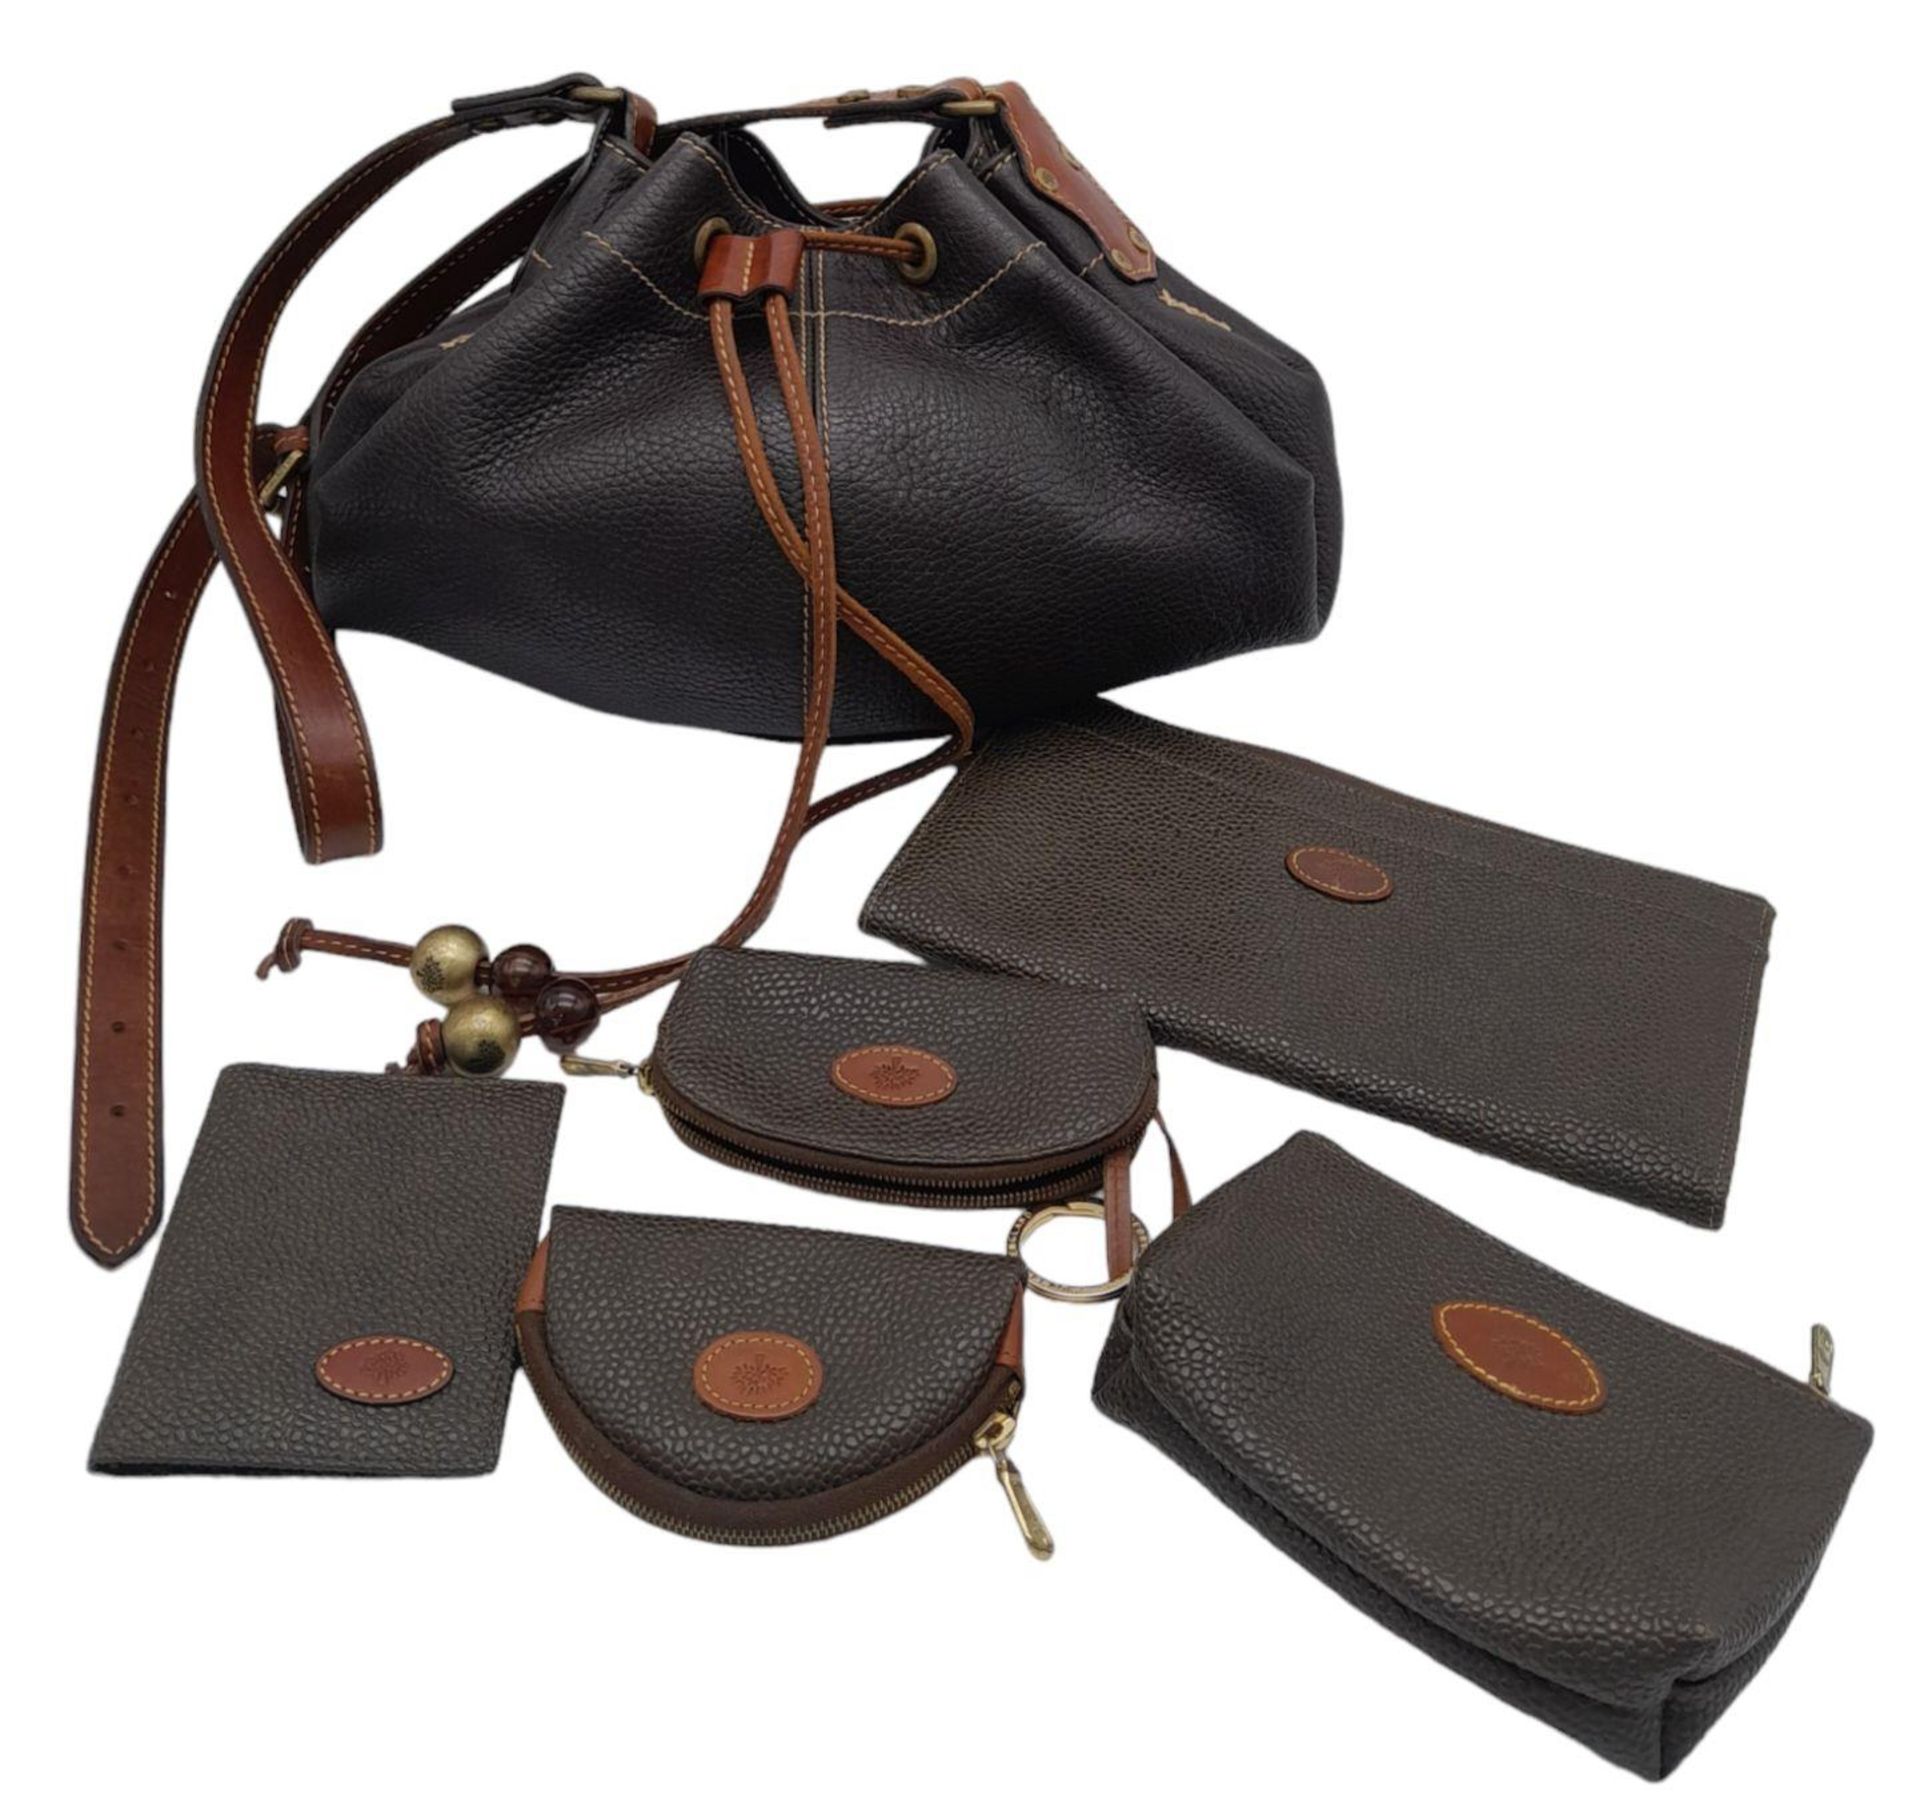 A Mulberry Brown Drawstring Bag. Leather exterior with gold-toned hardware, adjustable strap and